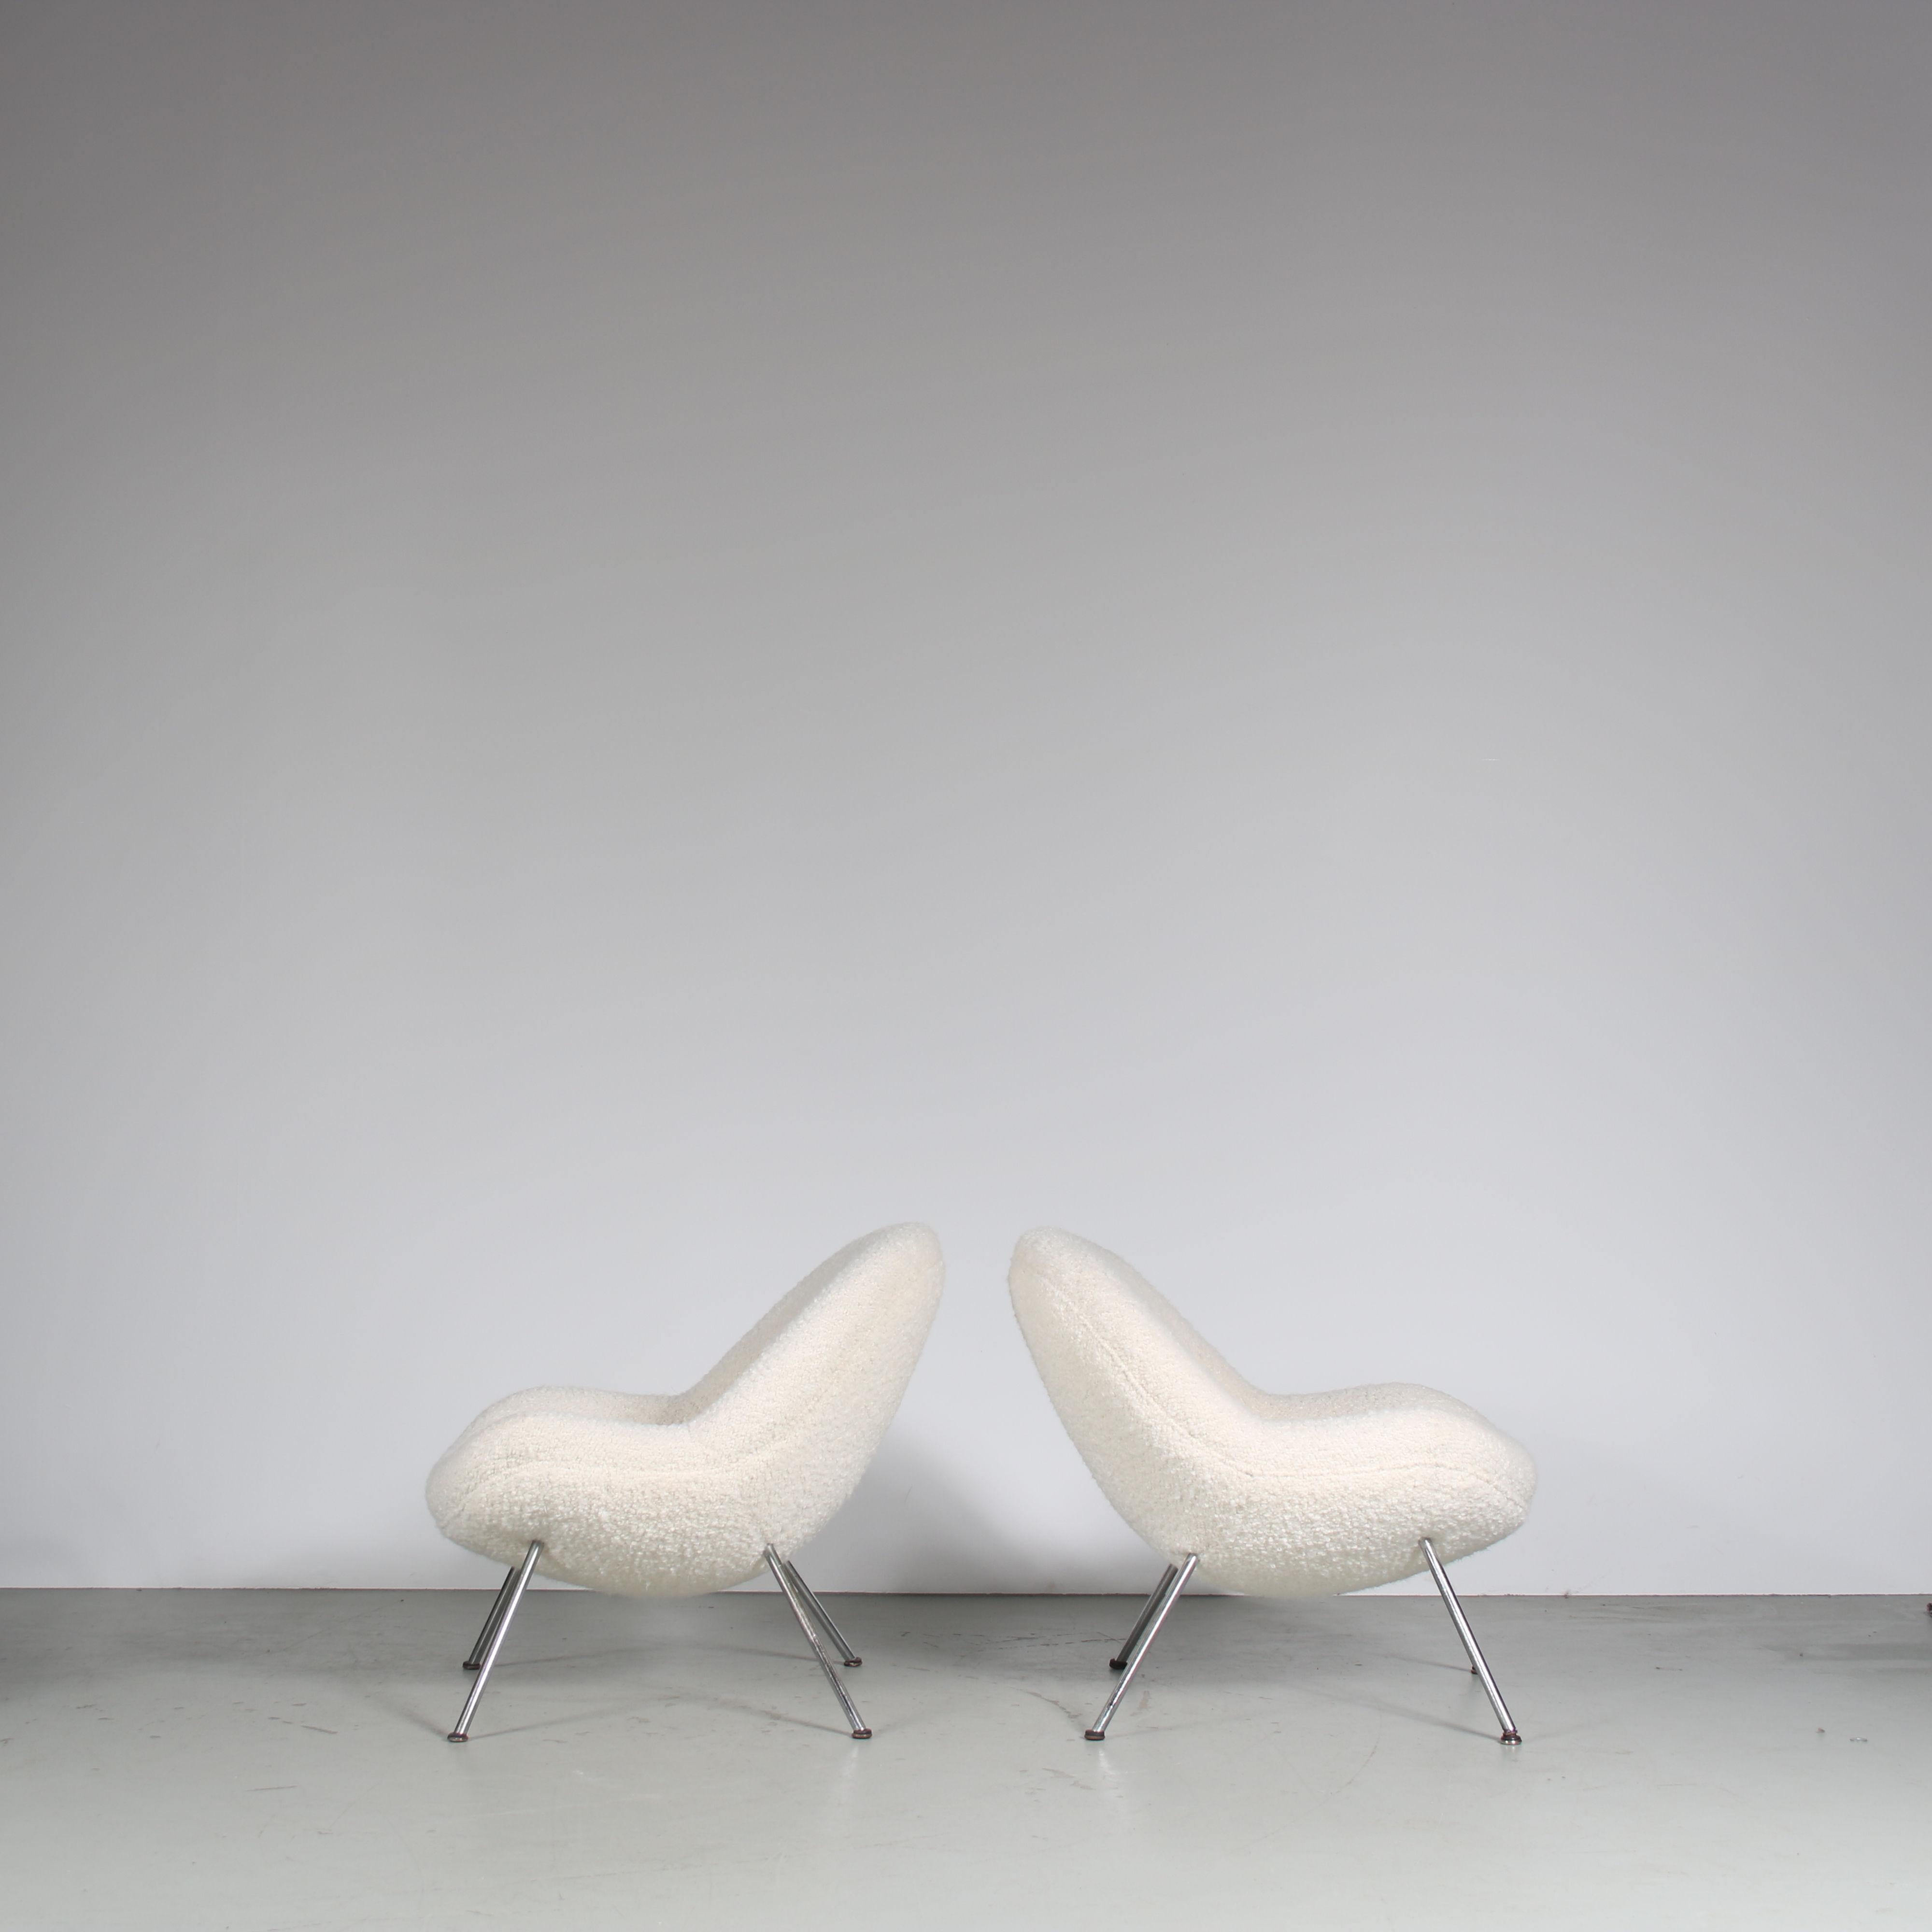 Metal Fritz Neth “Egg” Chairs for Correcta, Germany 1950 For Sale